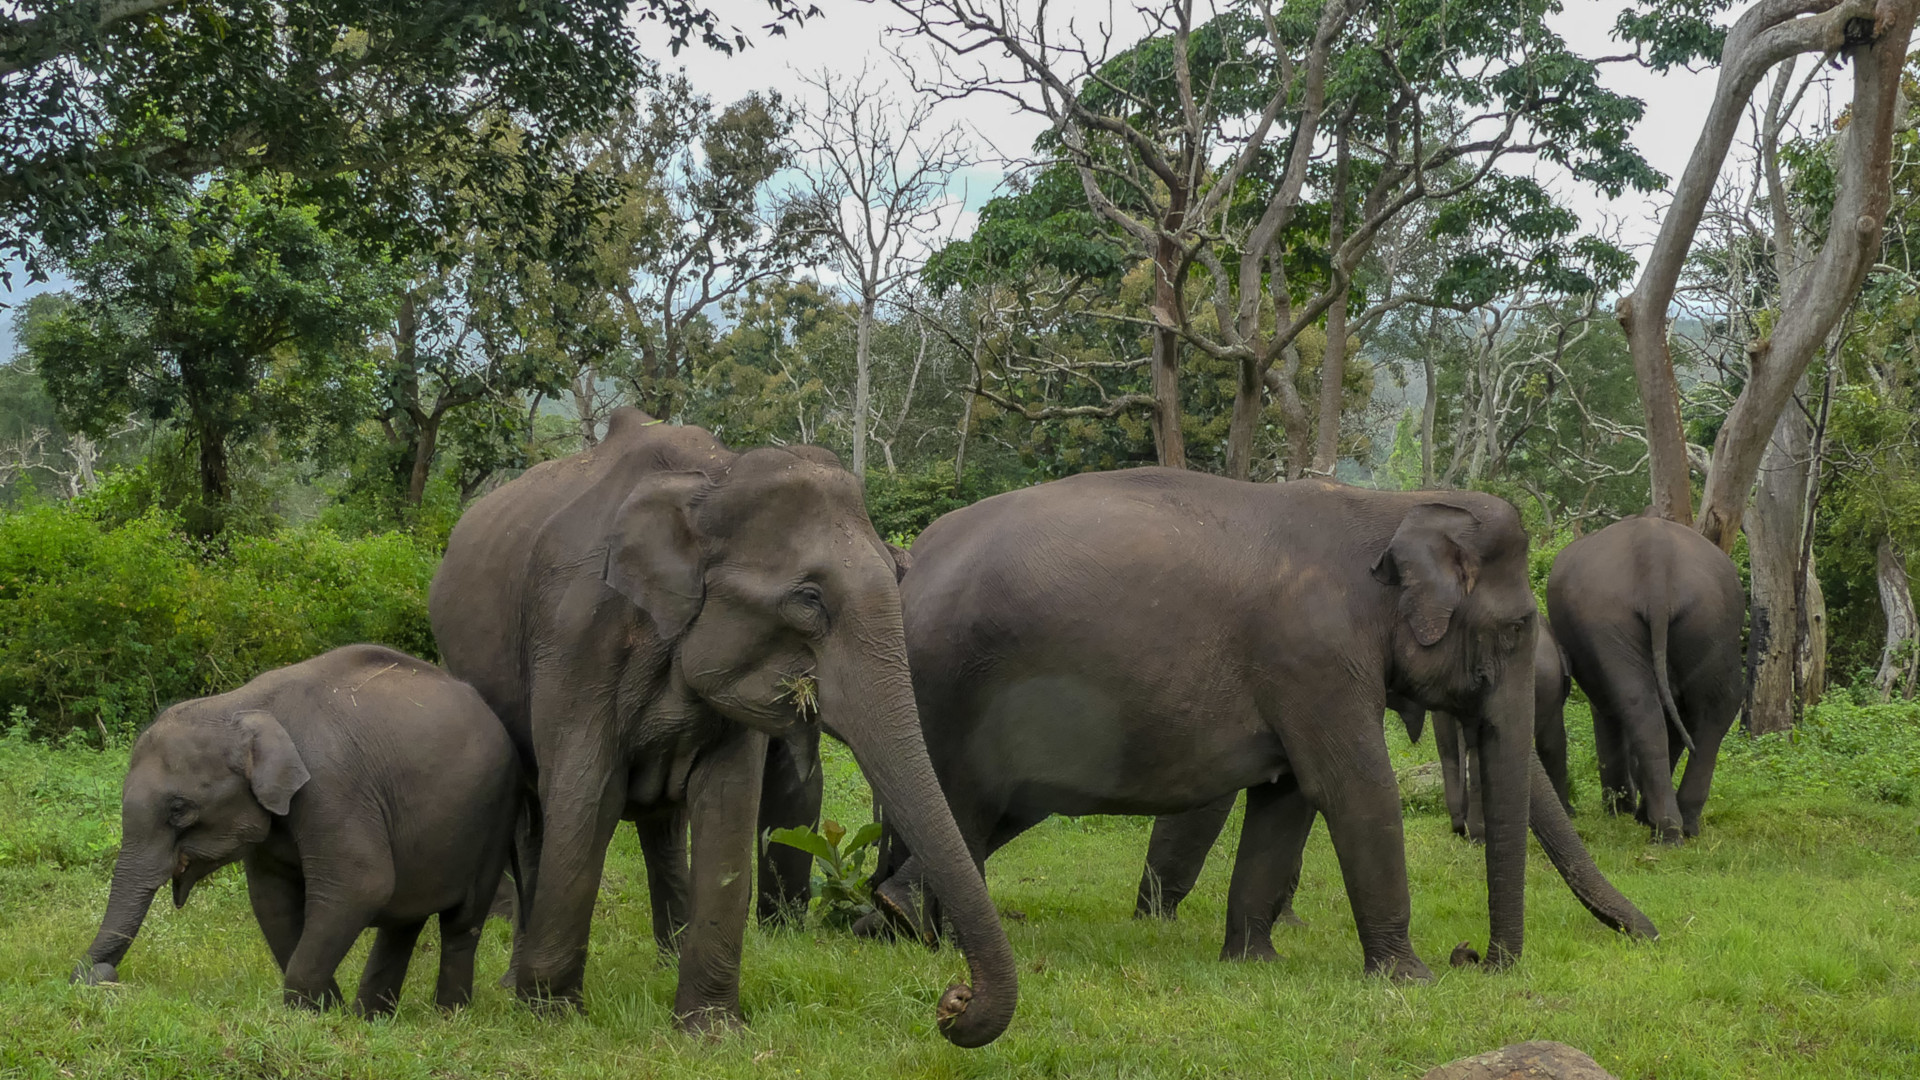 what is the difference between asian elephants and african elephants and which elephant is larger